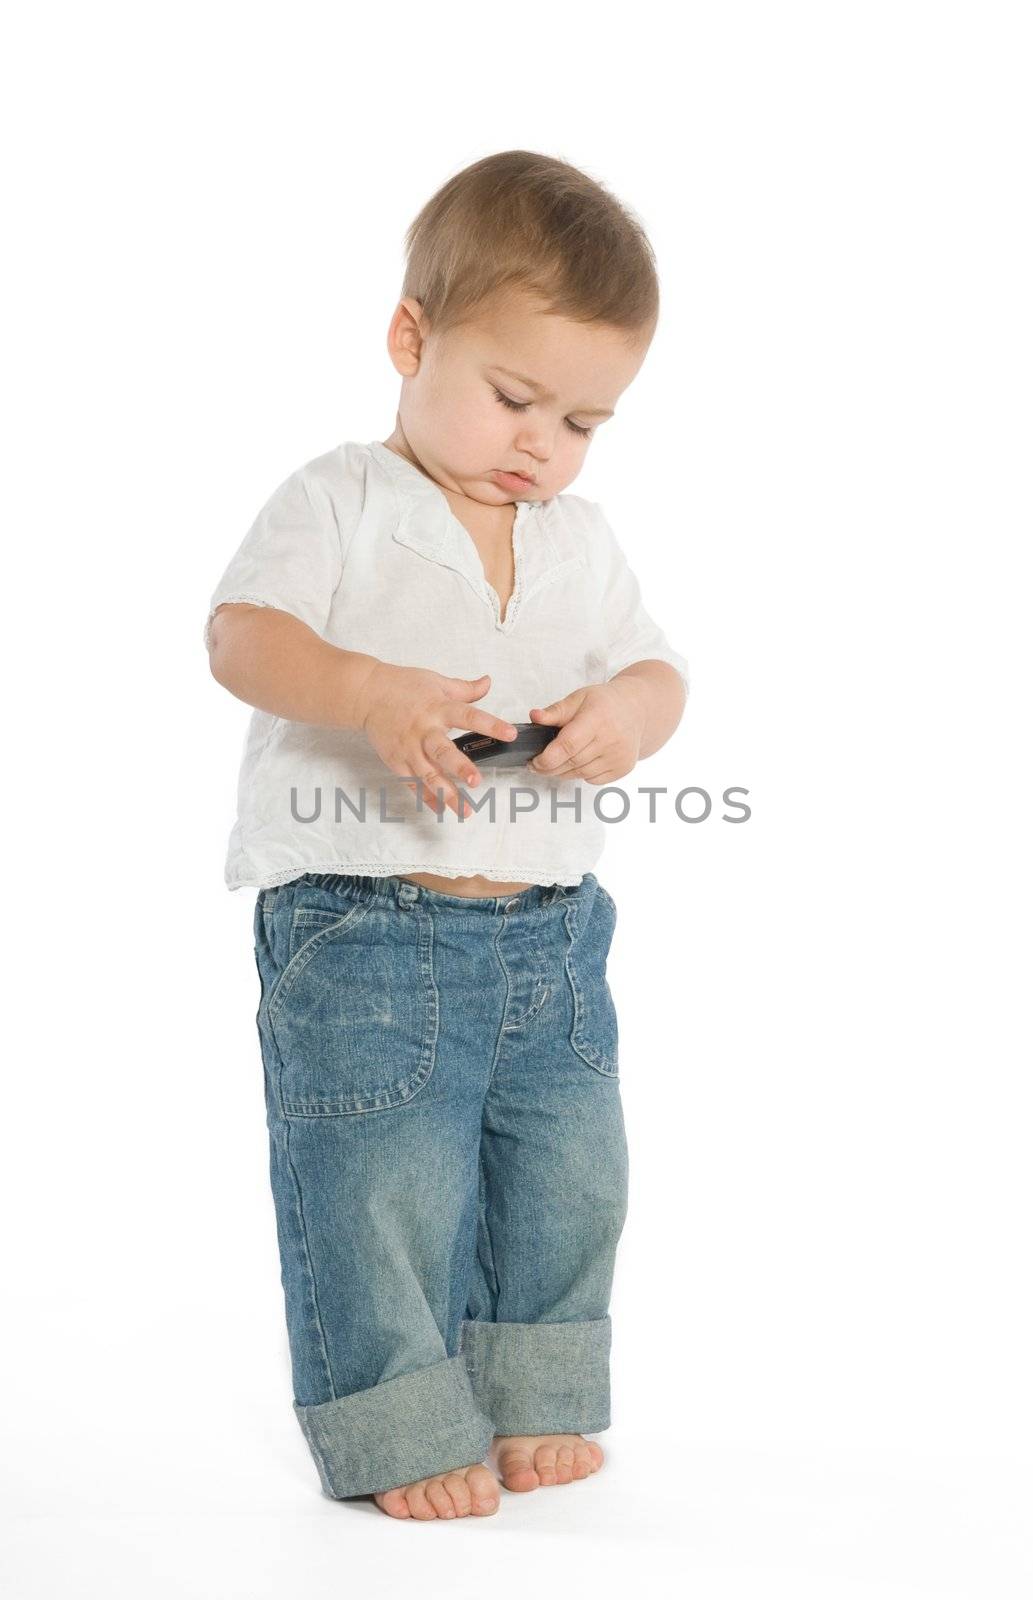 A little boy experimenting with a cellphone
